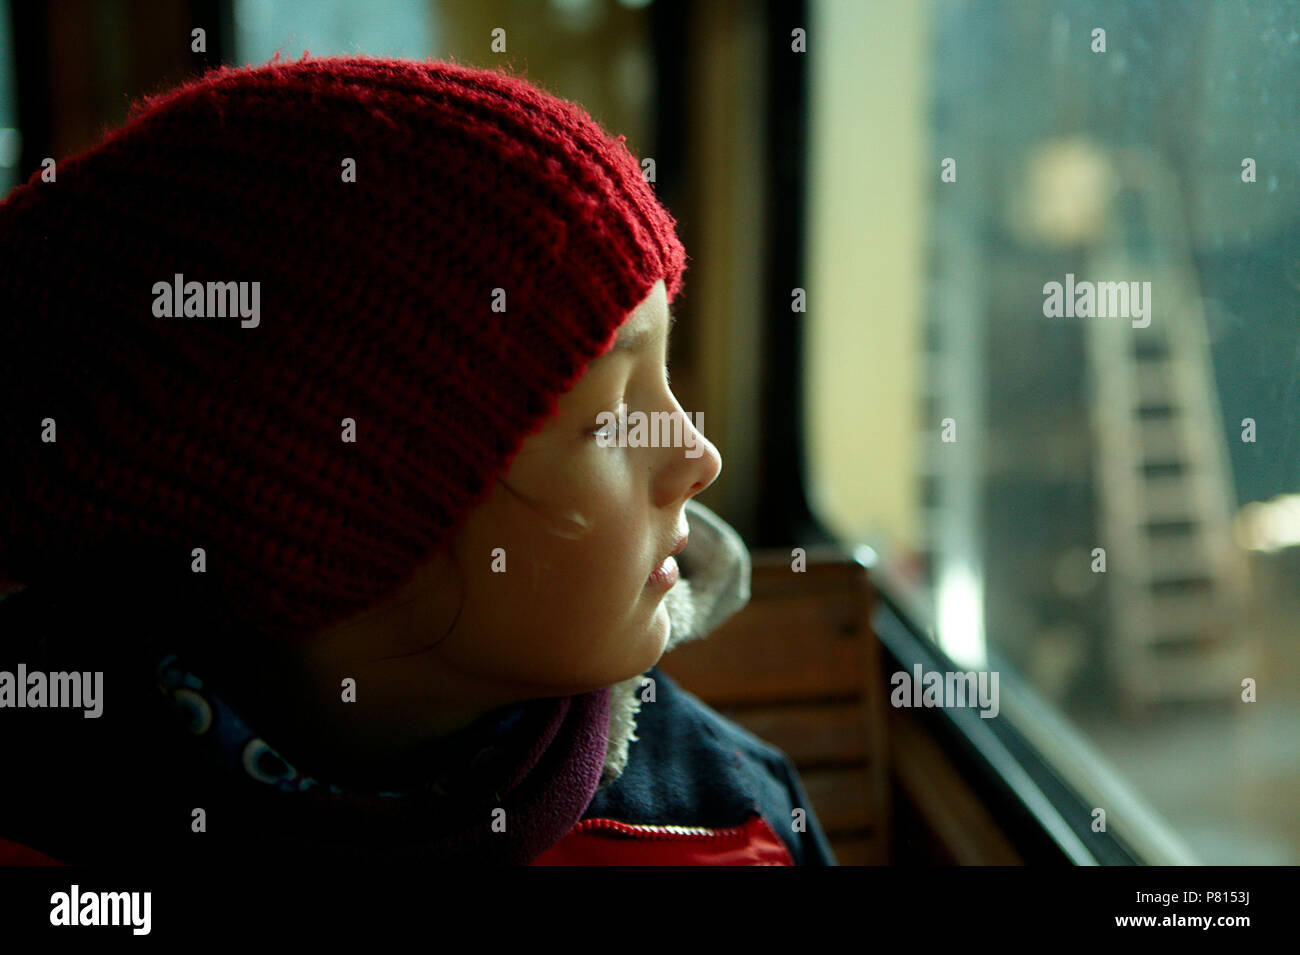 girl in red cap loking at old train window Stock Photo